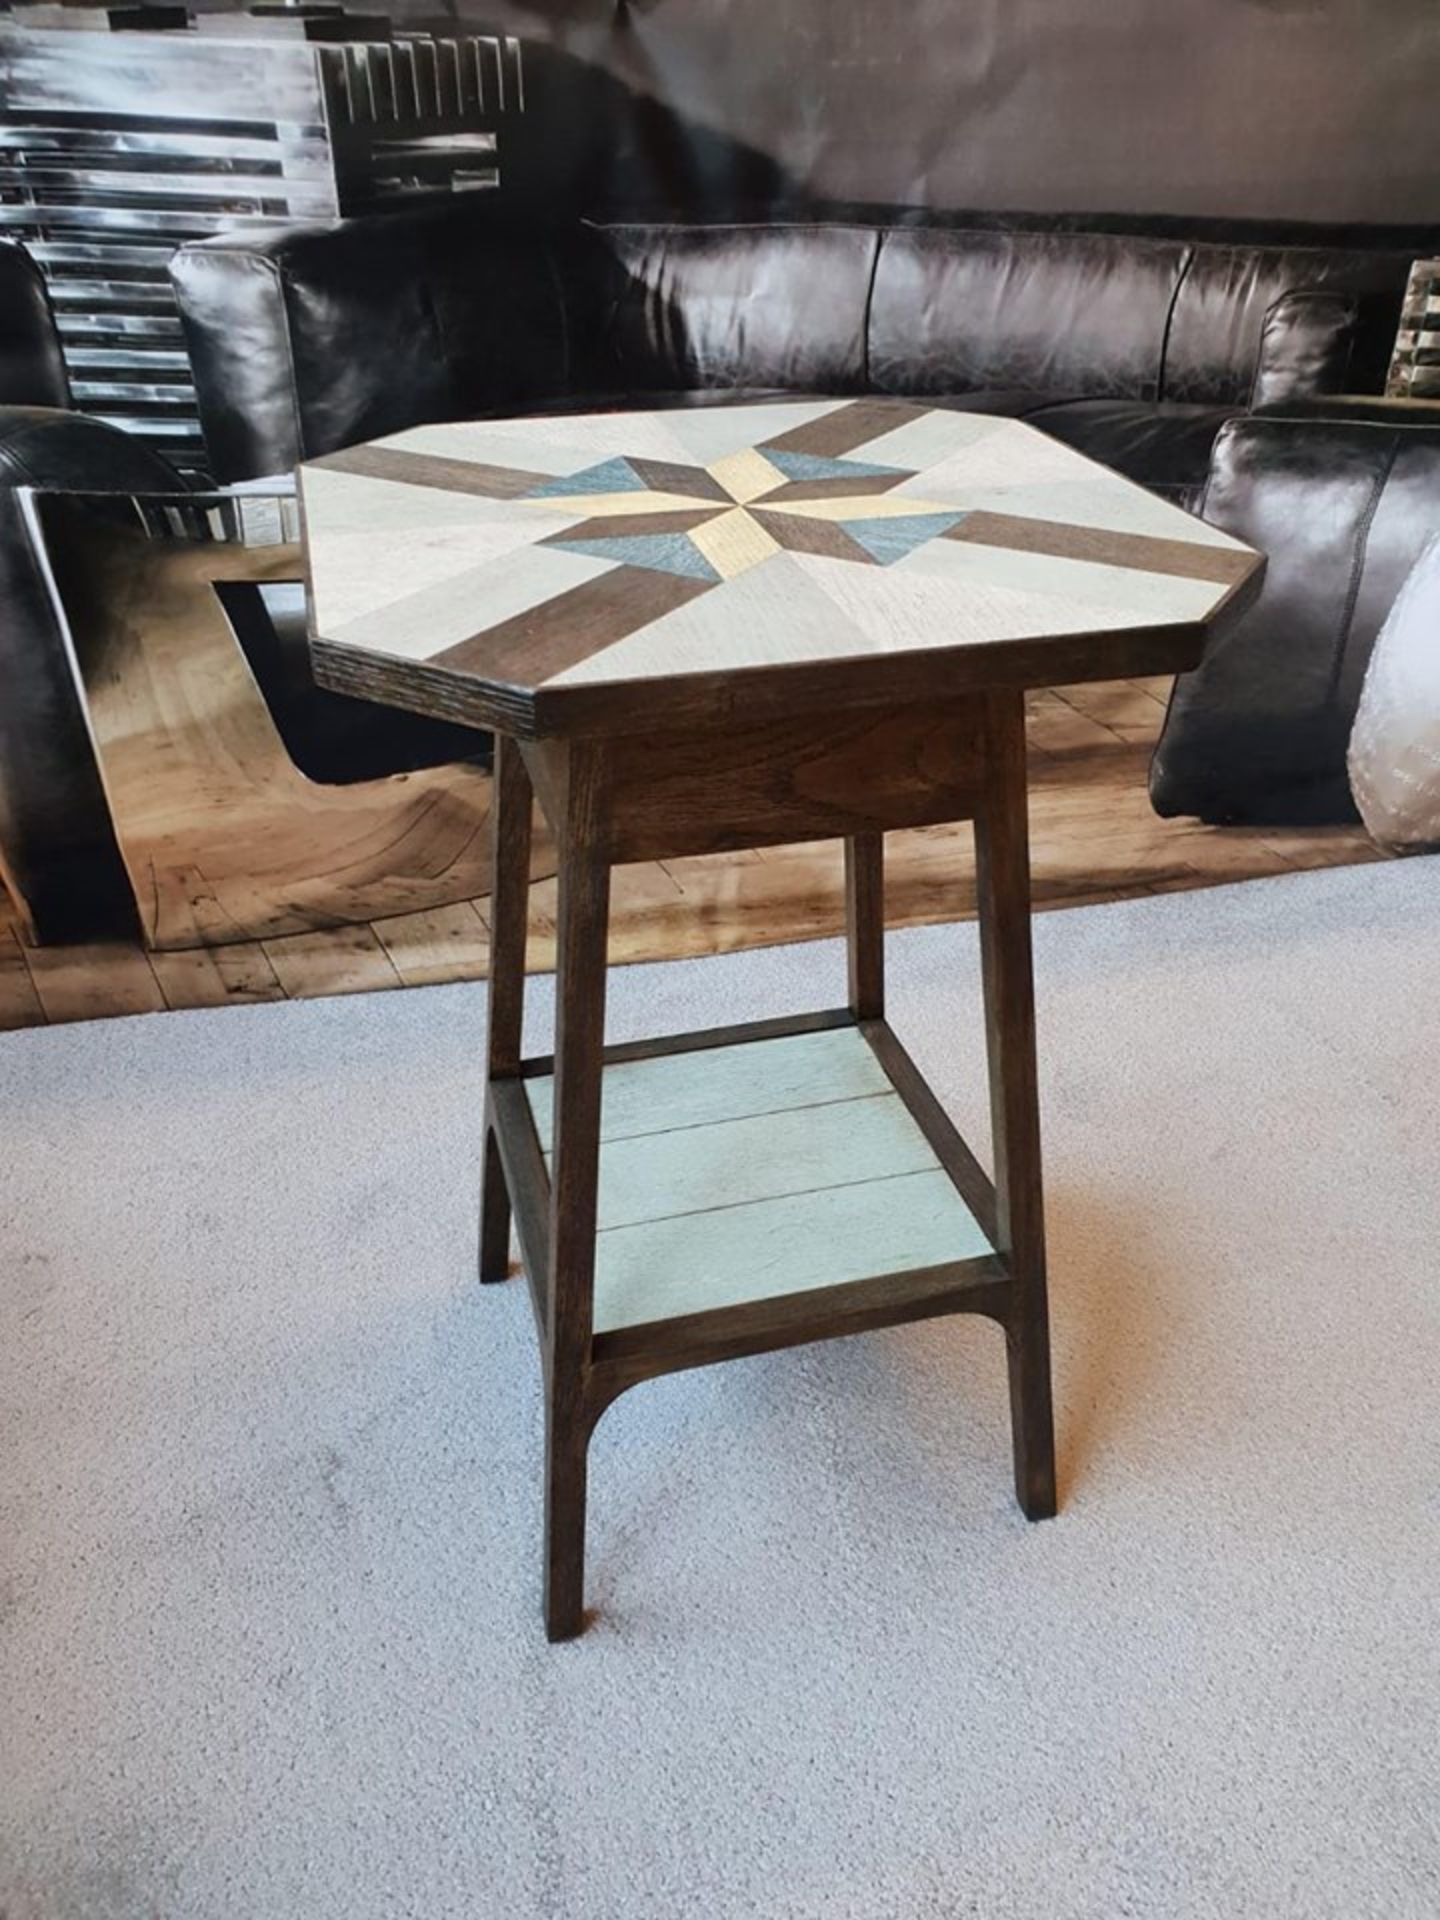 Brittania Oak Accent Table Accent Table With Geometric Quilt Pattern Top In Cream And Sage Green Oak - Image 2 of 2